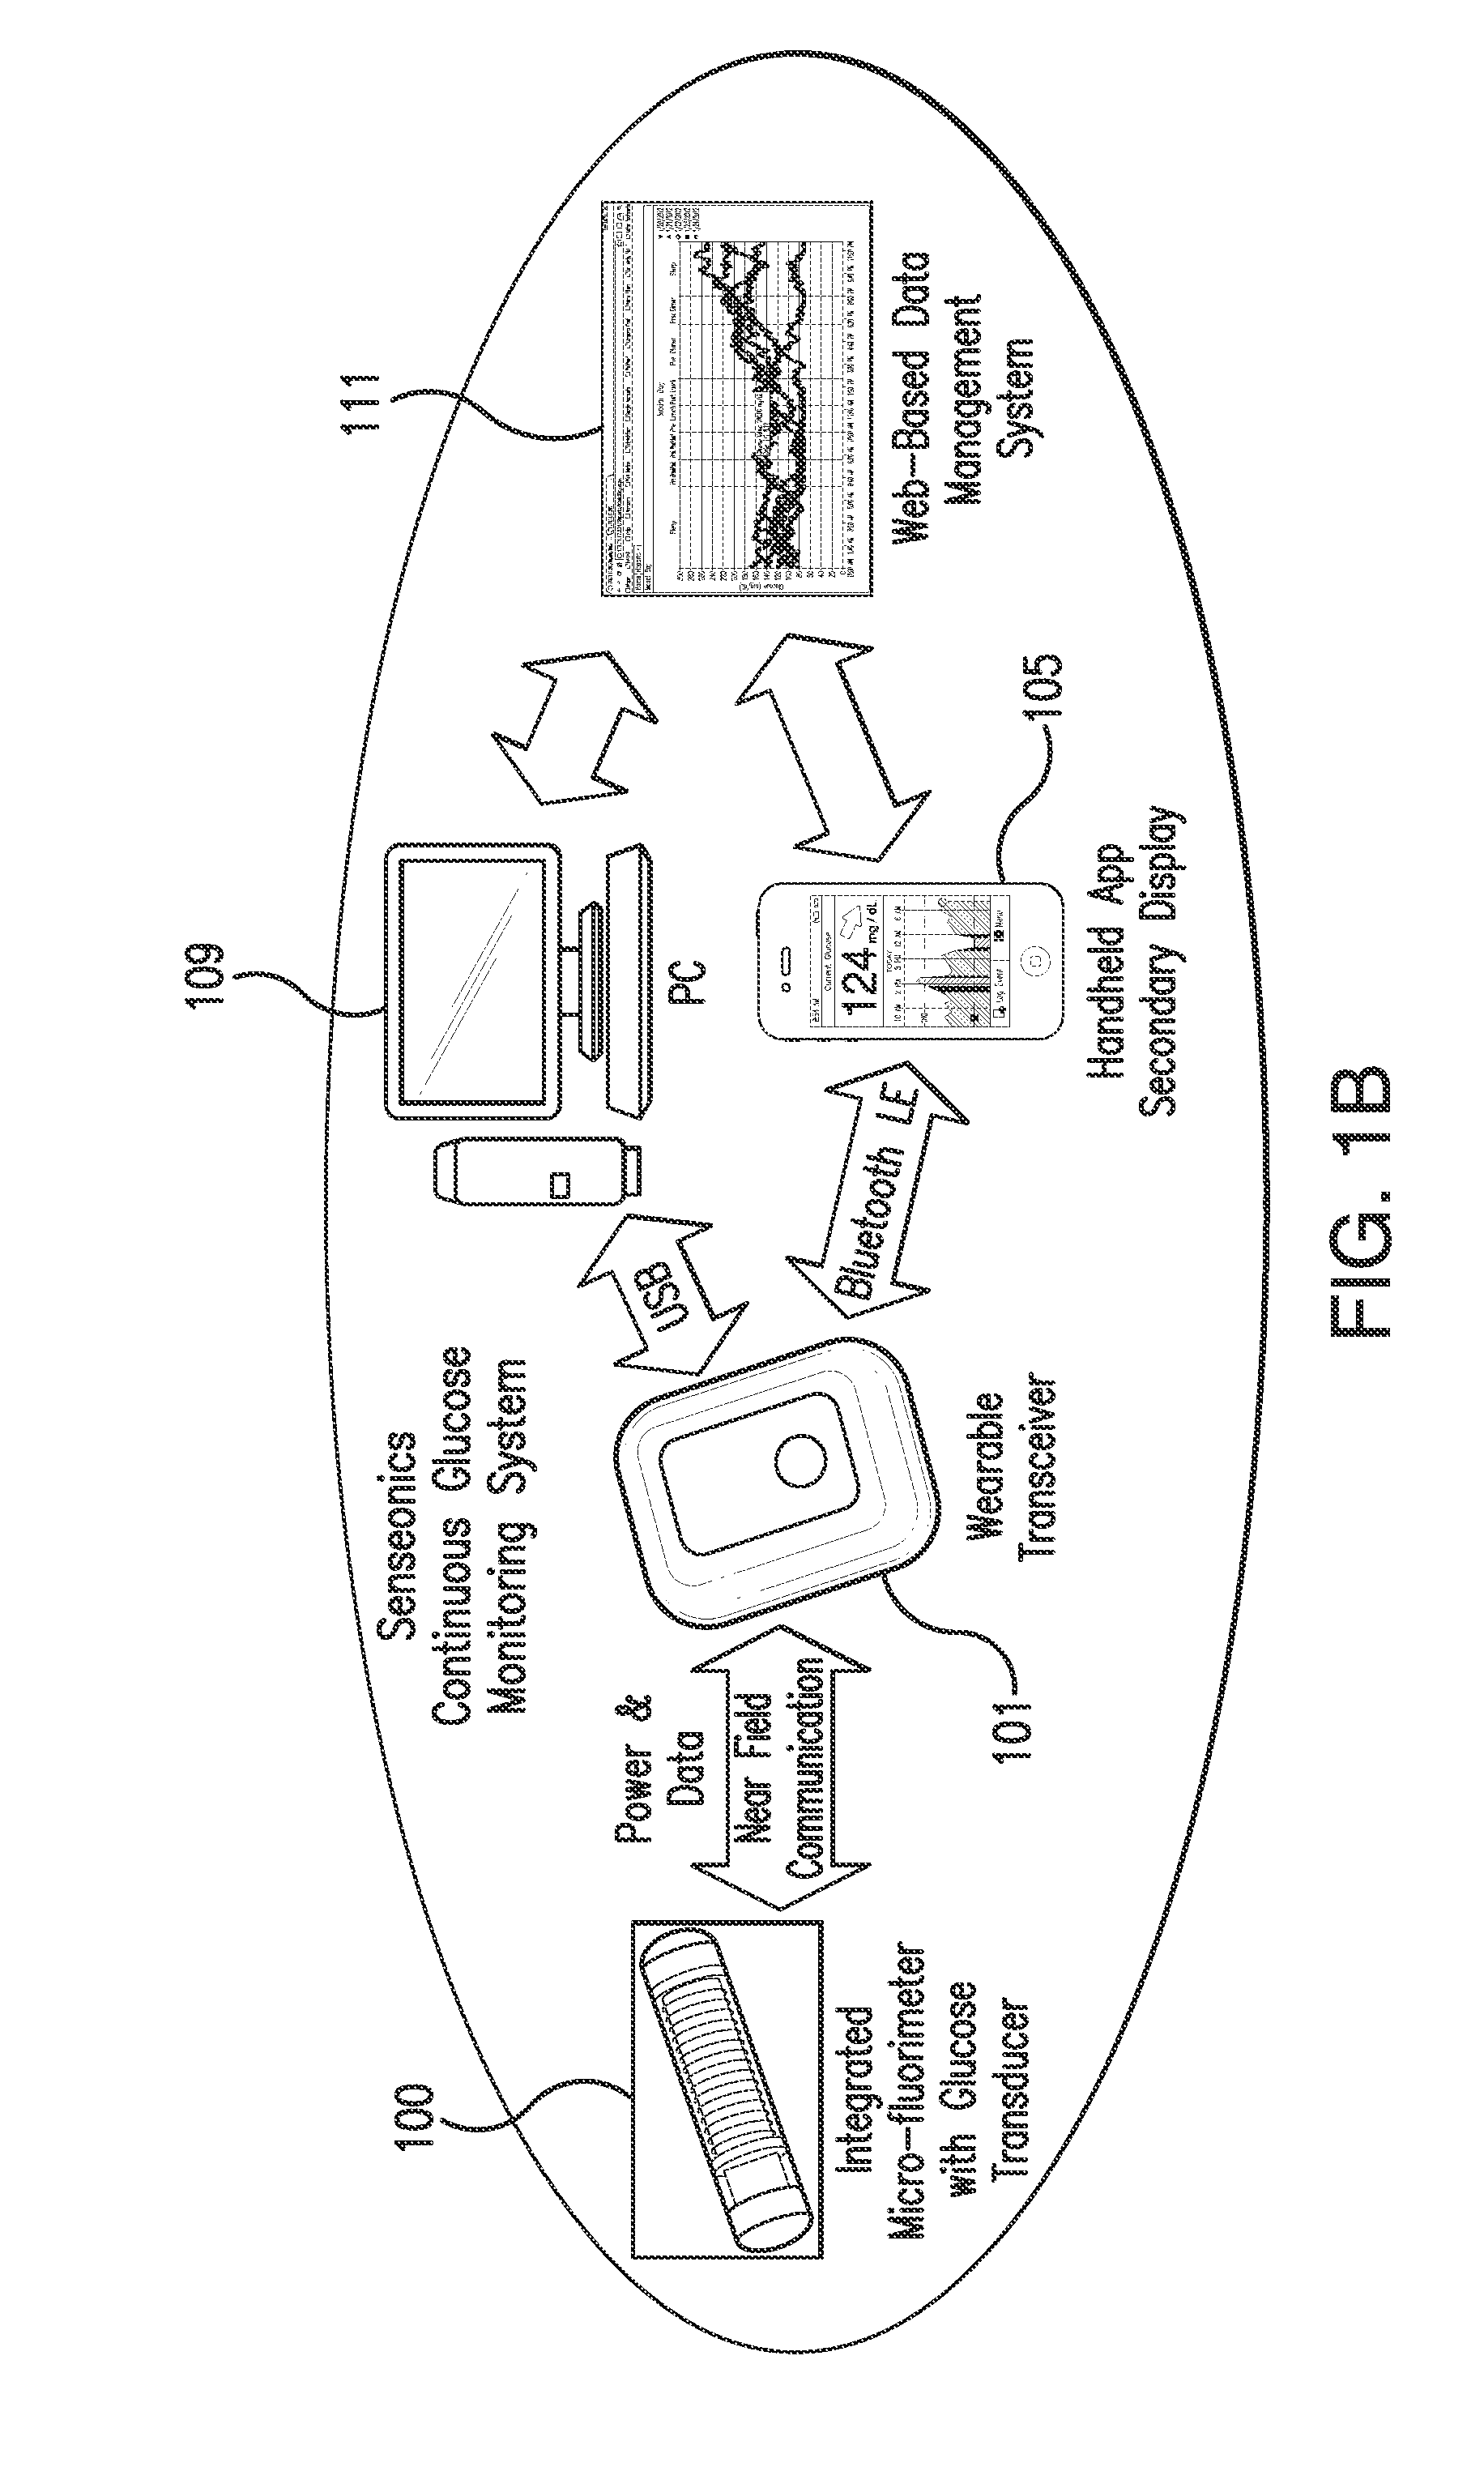 Continuous analyte monitoring system